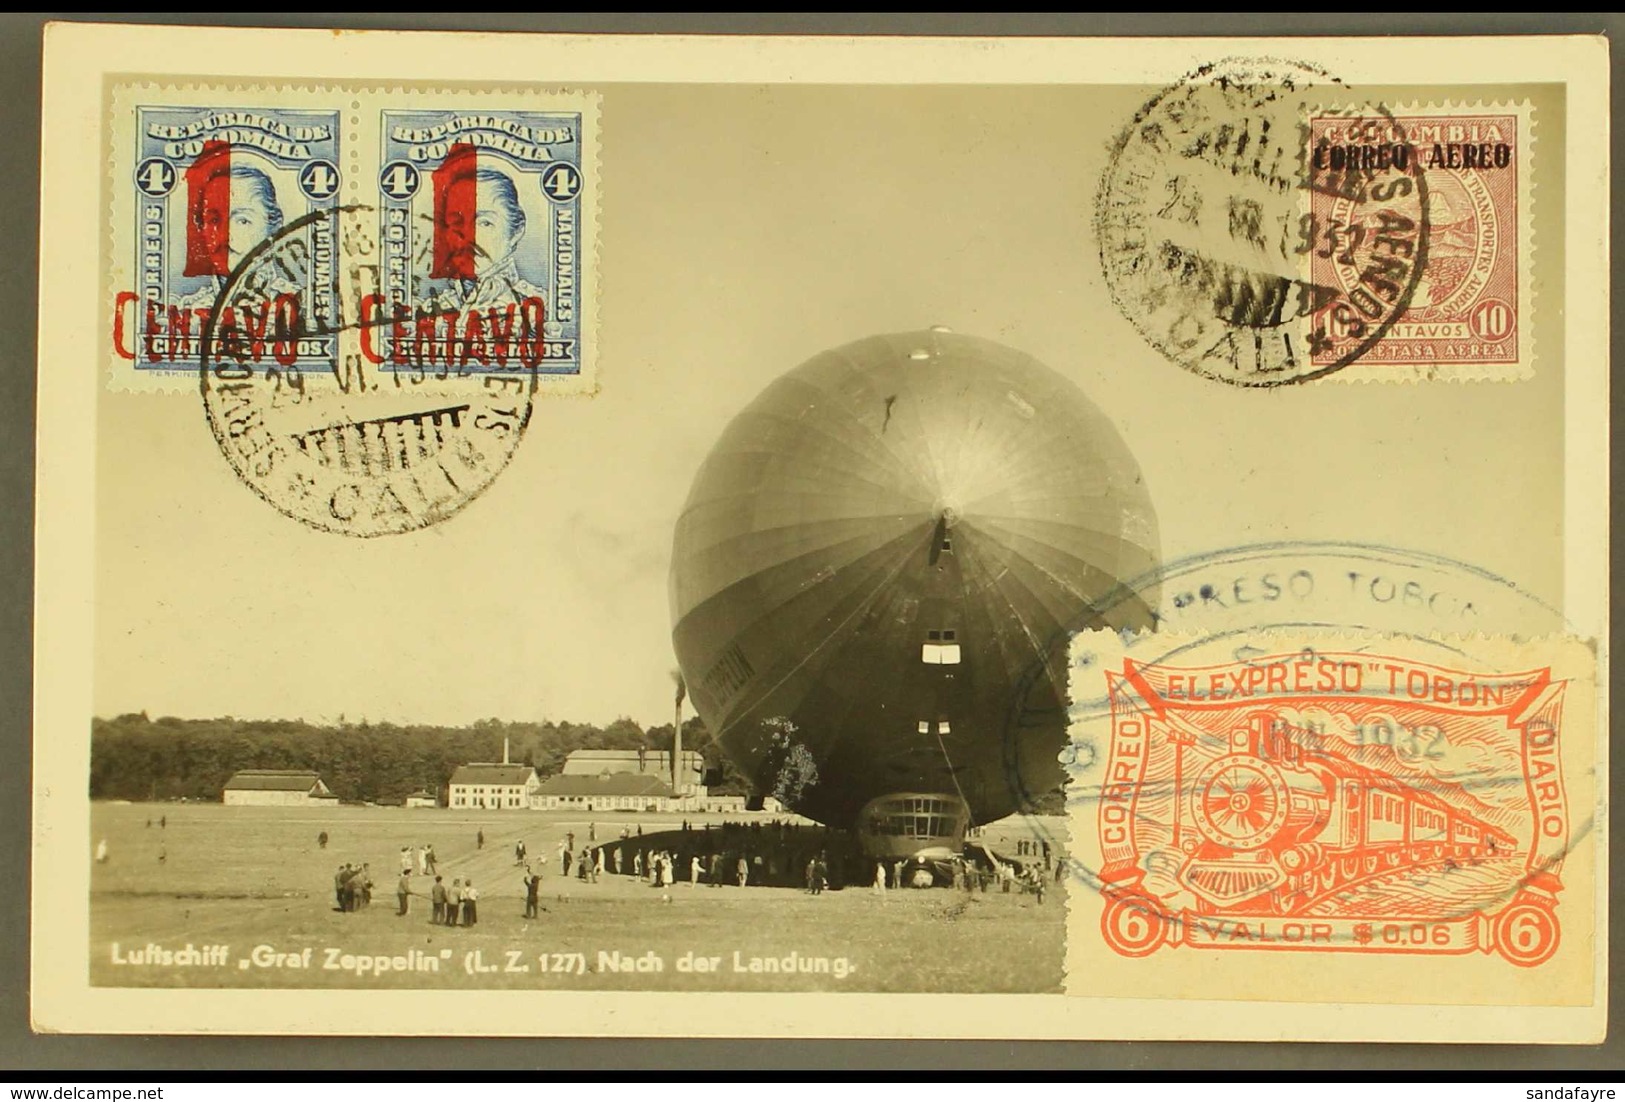 1932  PPC Of LZ127 Zeppelin Franked Colombia 1c On 4c Pair, Scadta 10c Mauve And Expreso Tobon 6c Vermilion Sent From Bo - Kolumbien